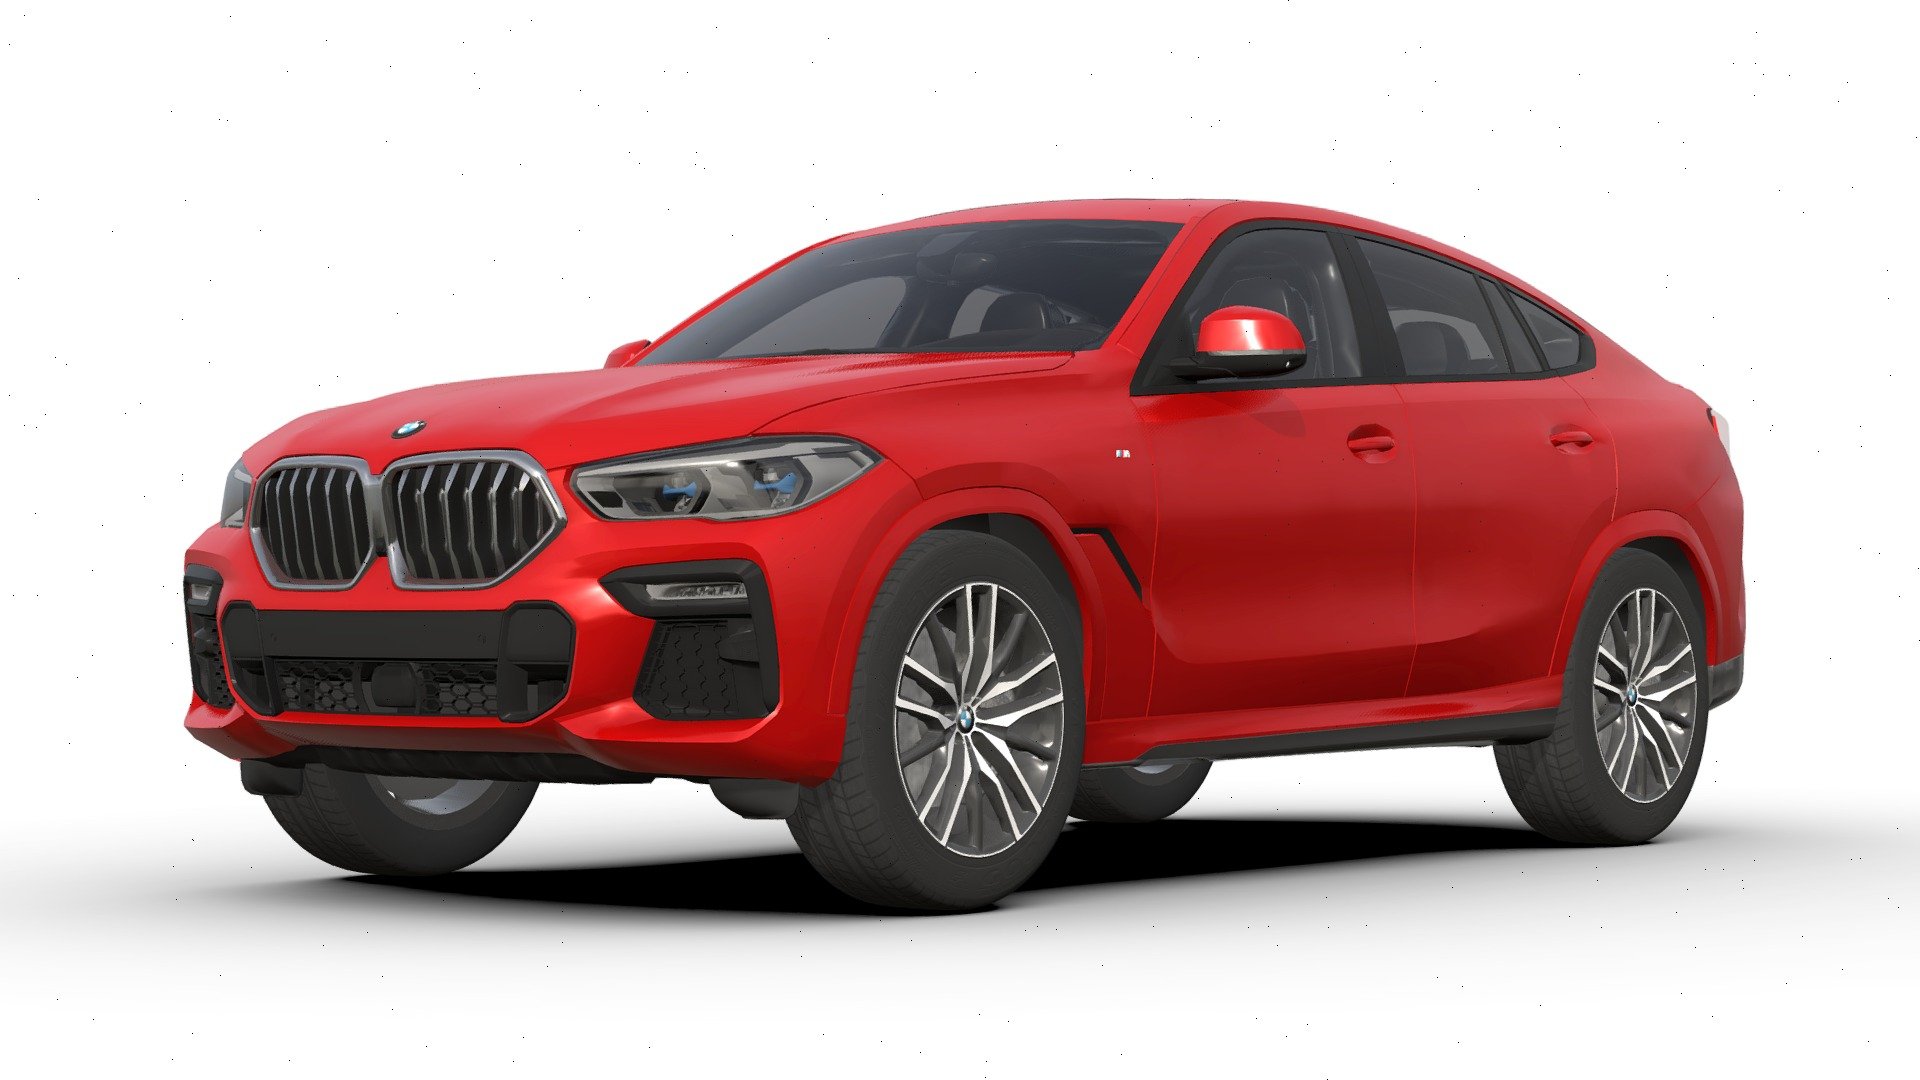 The BMW X6 3D model is a precisely made model of an SUV, ideal for use in visualizations, animations or automotive-related projects. The model features precise exterior and interior details, reflecting the distinctive design of the BMW X6 3d model